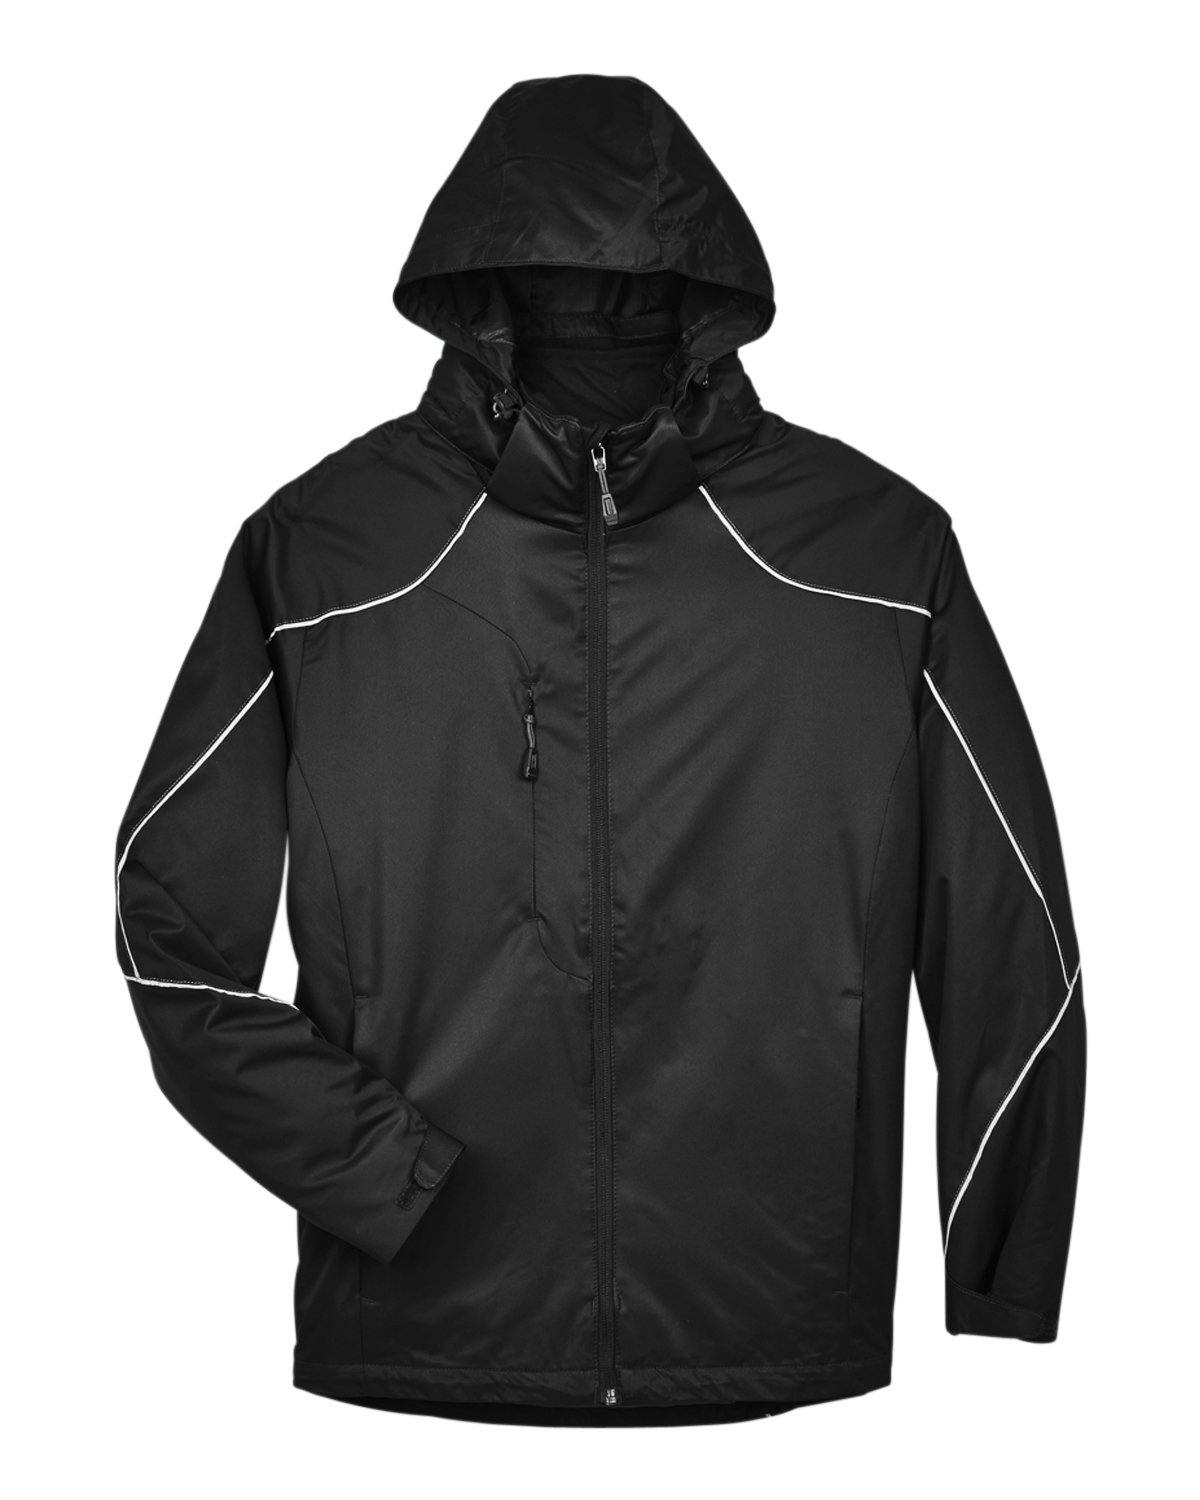 Image for Men's Tall Angle 3-in-1 Jacket with Bonded Fleece Liner